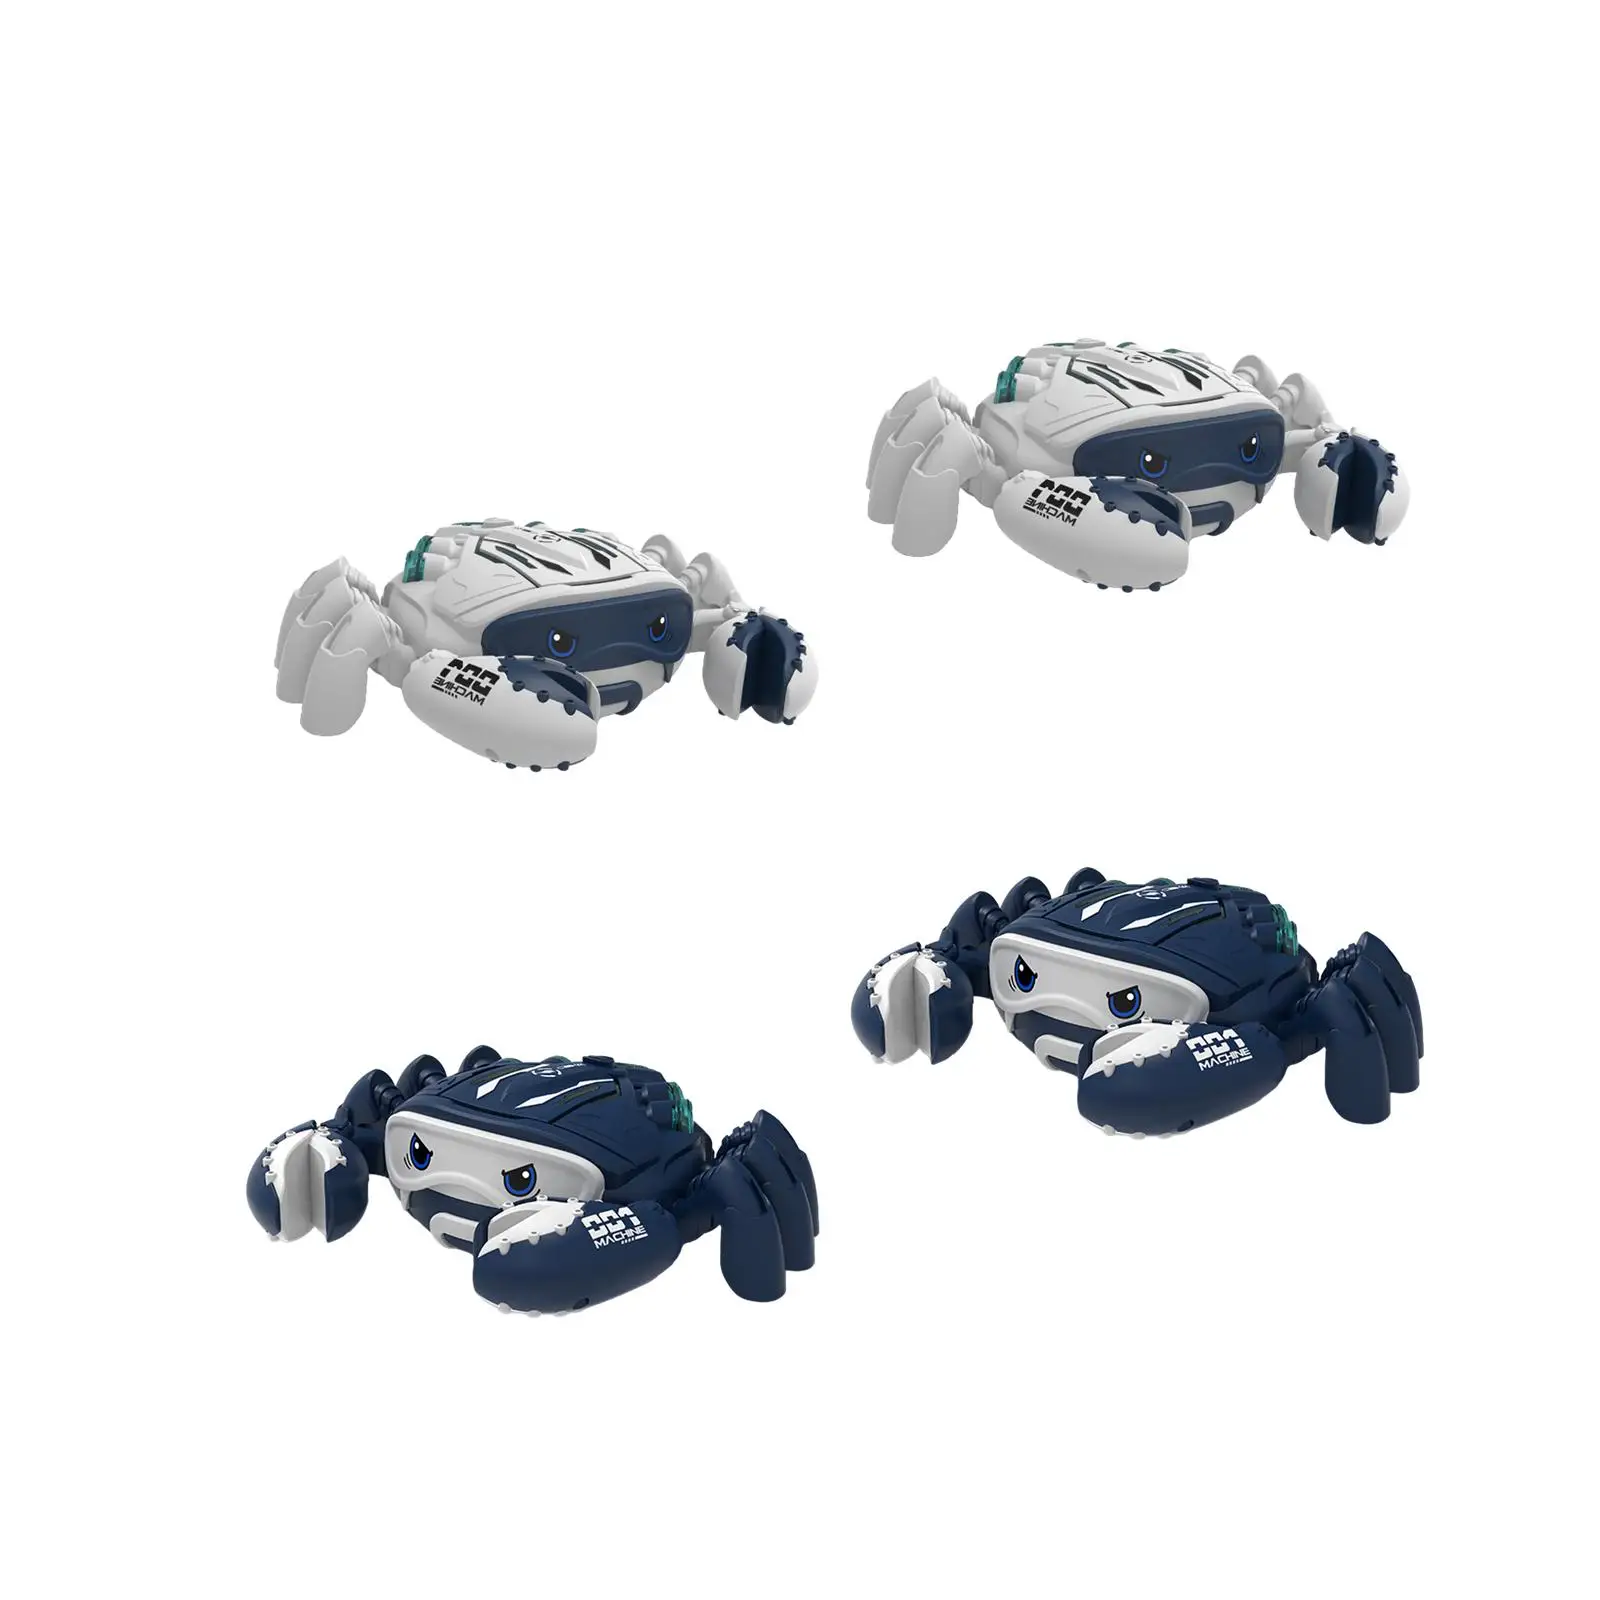 Crawling Toy Crabs Baby Toys Interactive Electric Walking Toys for Kids Electric Crabs Toy Musical Toys Boys Girls Gifts